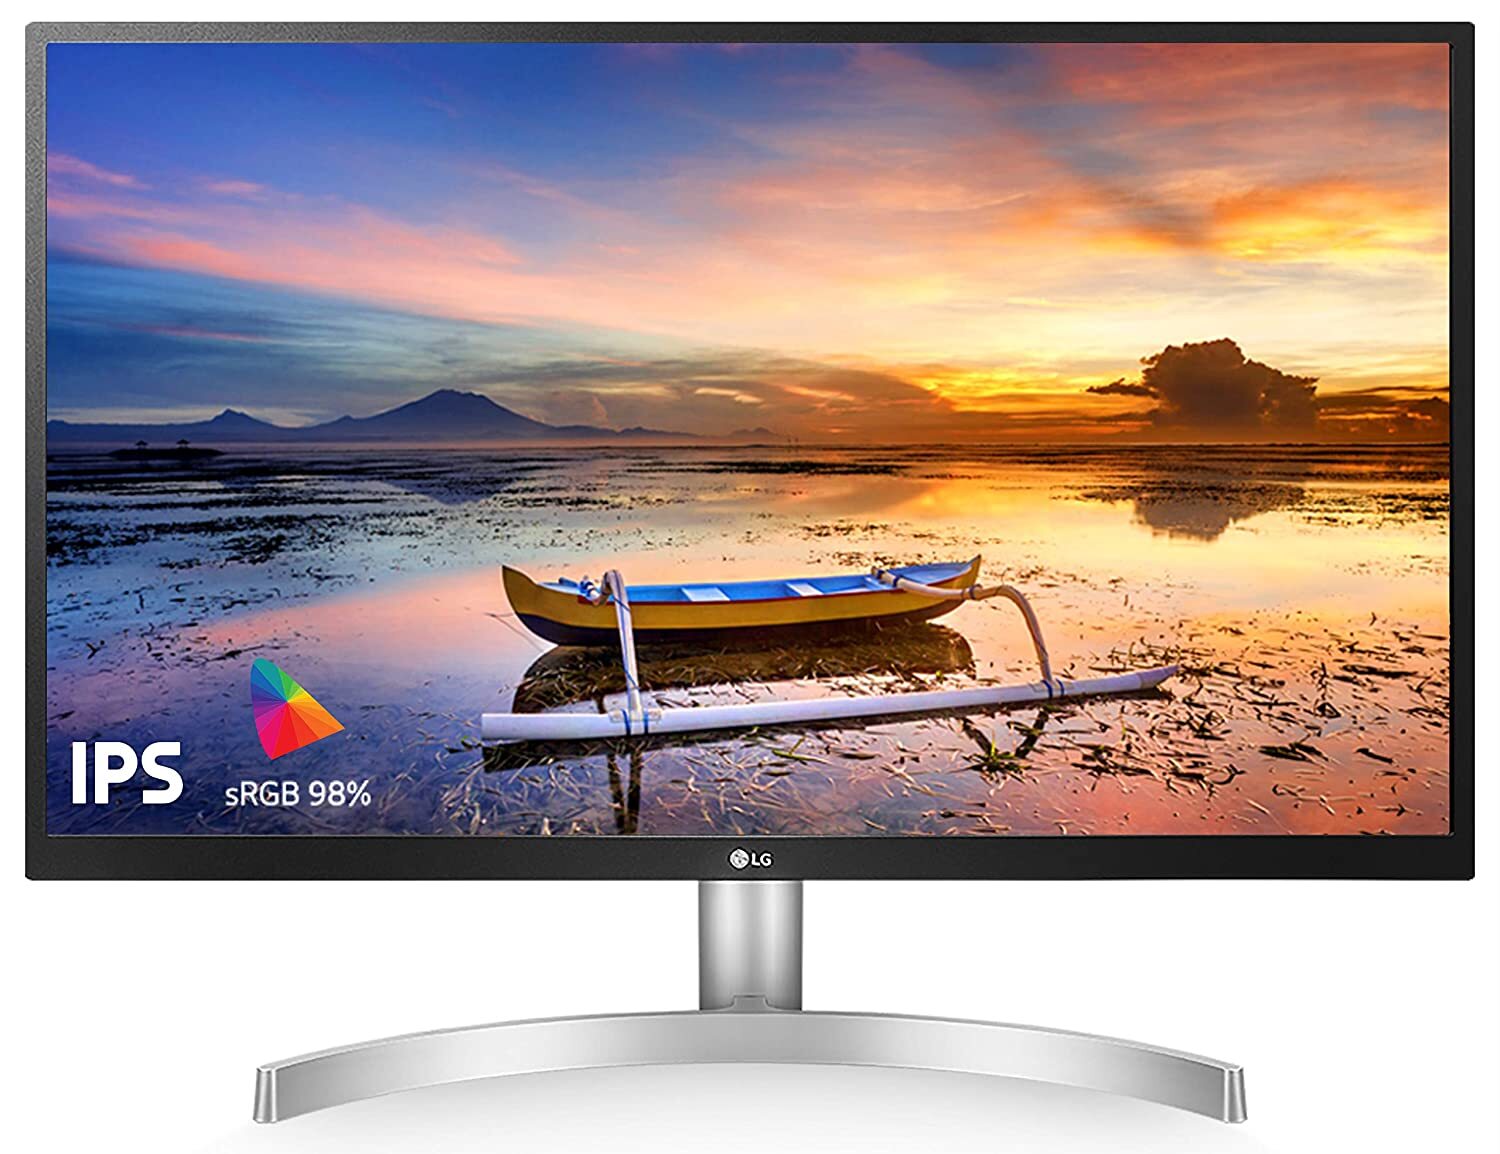 LG 27 inch 4K-UHD (3840 x 2160) HDR 10 Monitor (Gaming & Design) with IPS Panel, HDMI x 2, Display Port, AMD Freesync  - 27UL500 (Silver Stand with White Body)